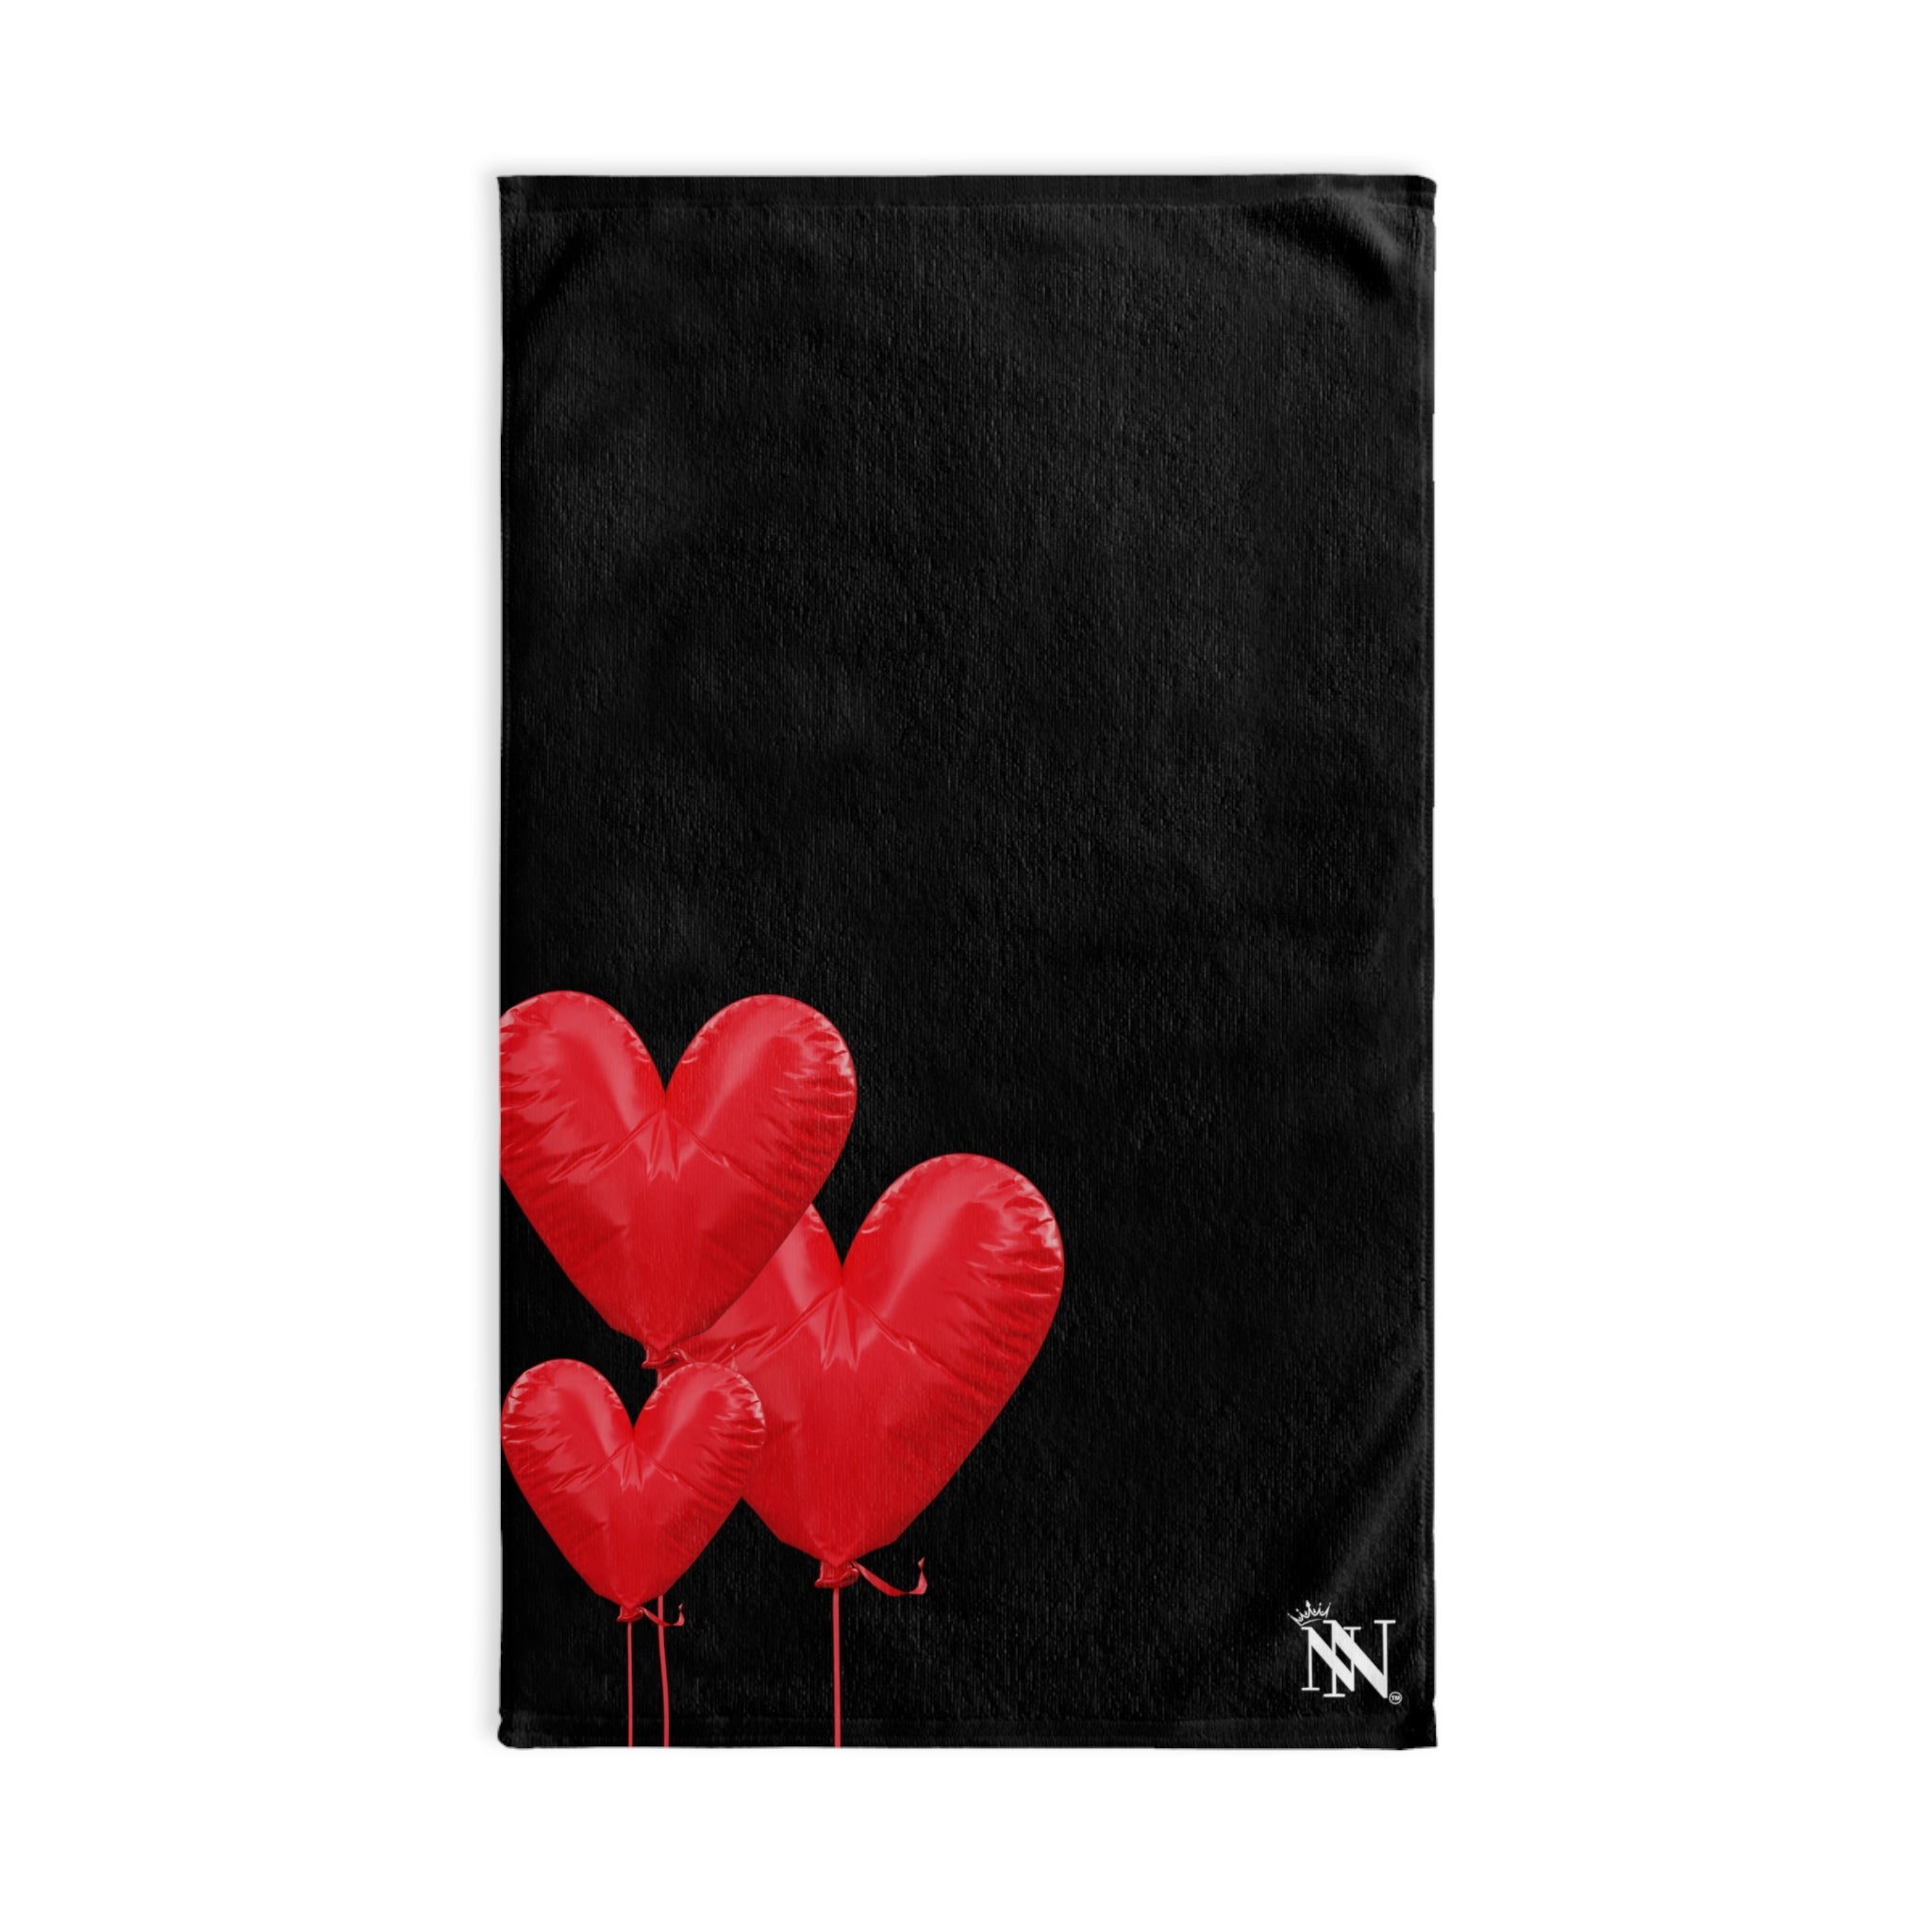 Bouquet Red Heart Black | Sexy Gifts for Boyfriend, Funny Towel Romantic Gift for Wedding Couple Fiance First Year 2nd Anniversary Valentines, Party Gag Gifts, Joke Humor Cloth for Husband Men BF NECTAR NAPKINS